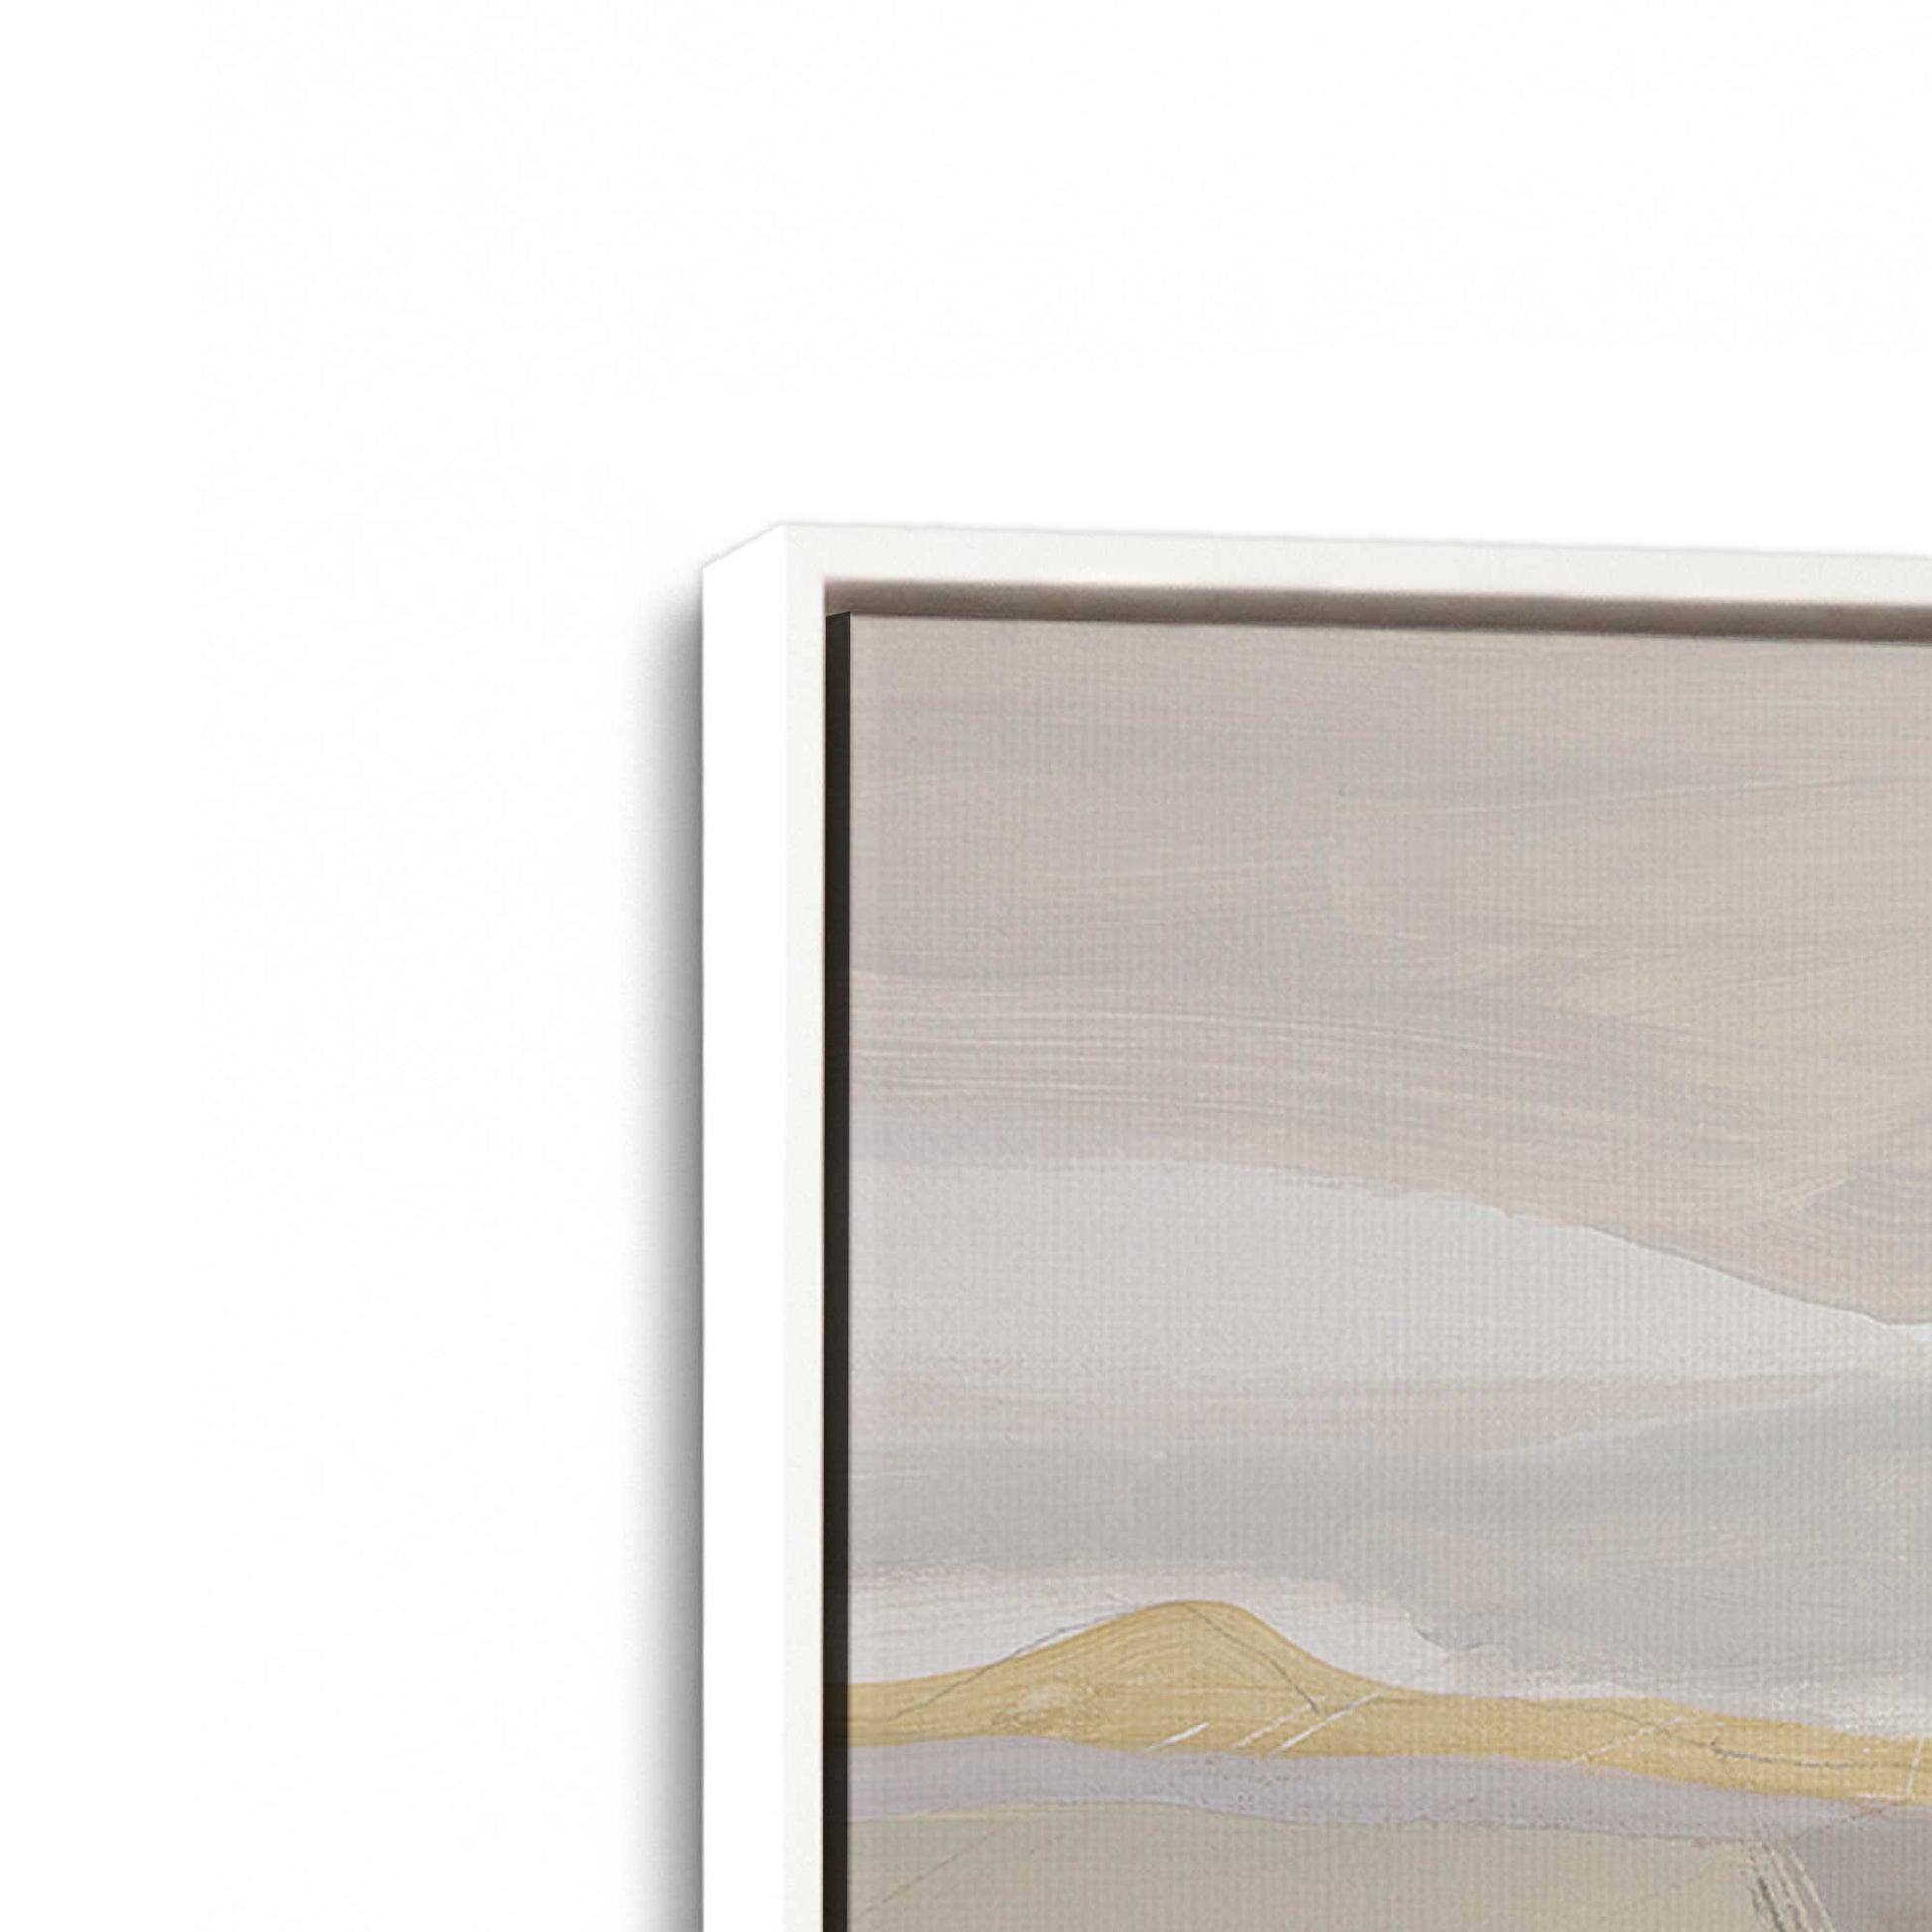 [Color:Opaque White] Picture of the corner of the art